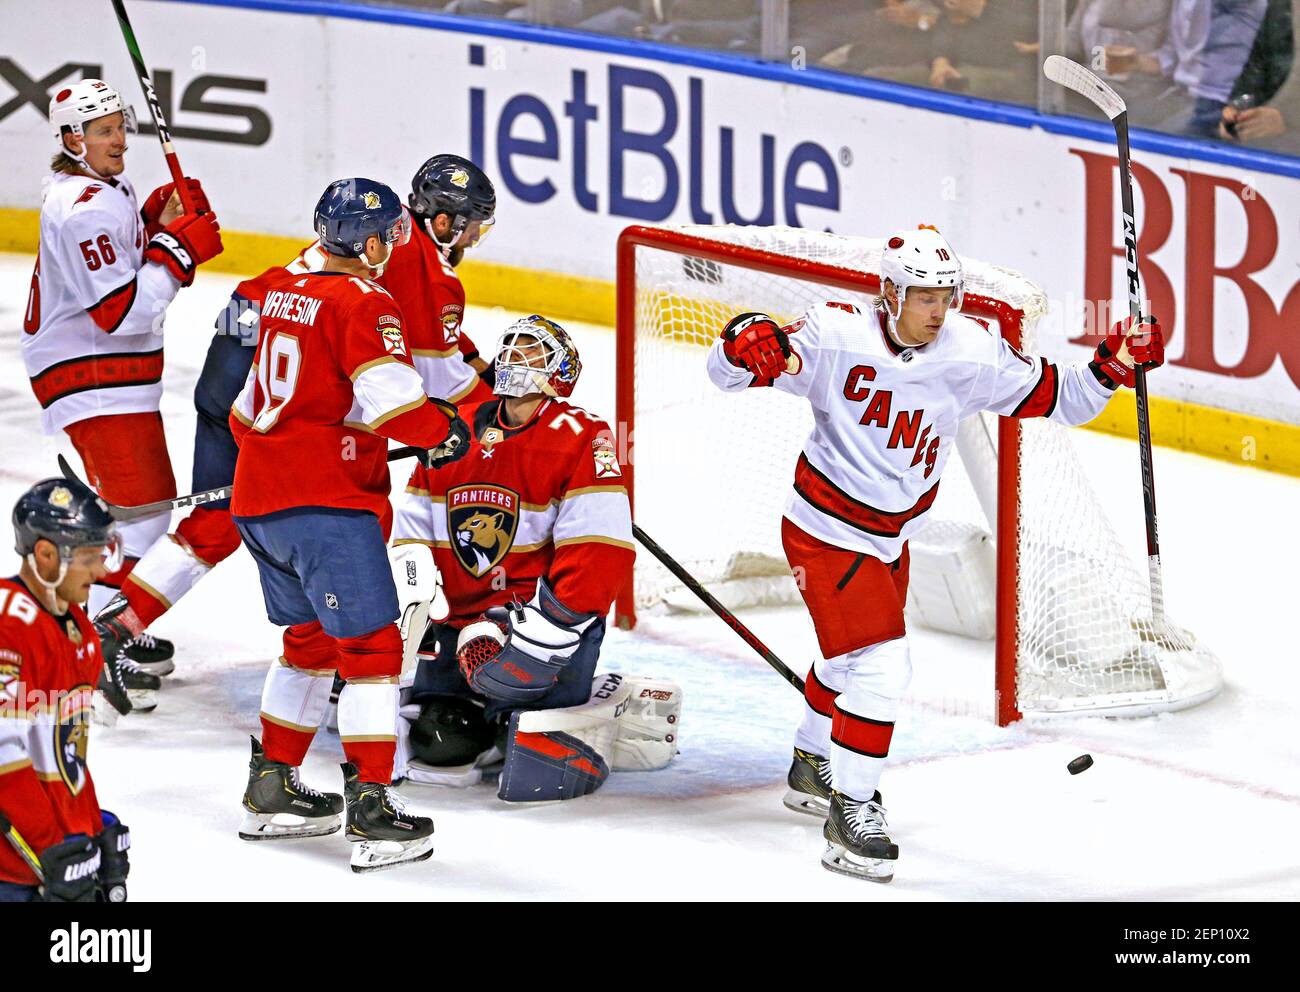 Florida Panthers goalie Sergei Bobrovsky (72) reacts as Carolina Hurricanes center Ryan Dzingel (18) celebrate after scoring a power play goal during the first period of an NHL hockey game at the BB&T Center Tuesday, Oct. 8, 2019 in Sunrise, Fla. (Photo by David Santiago/Miami Herald/TNS/Sipa USA) Stock Photo